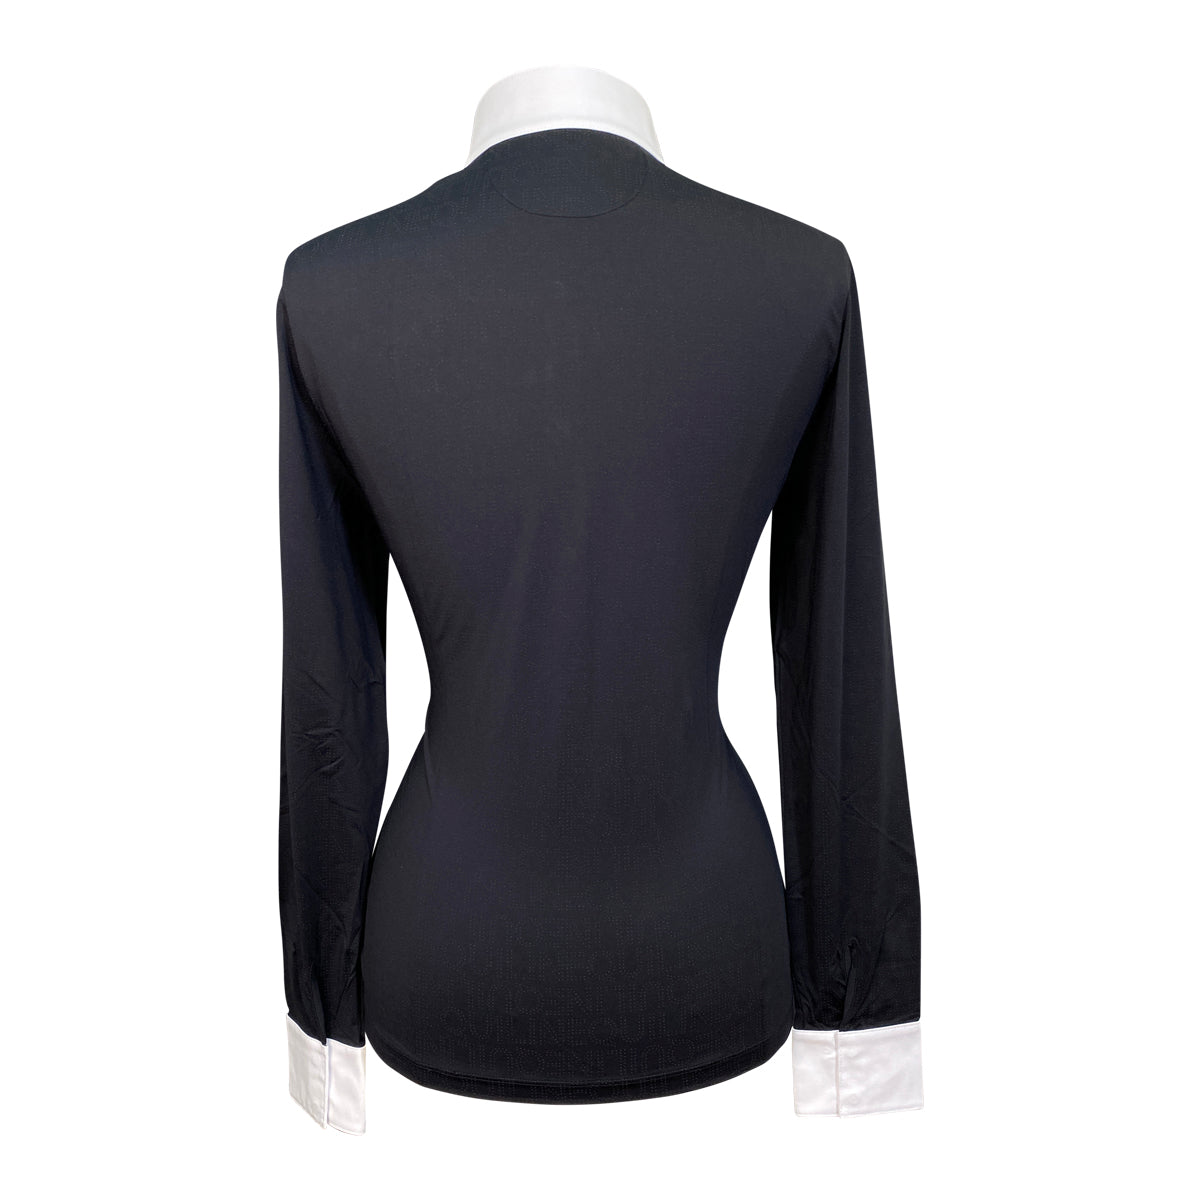 Equiline 'Cindrac' Long Sleeve Show Shirt in Black